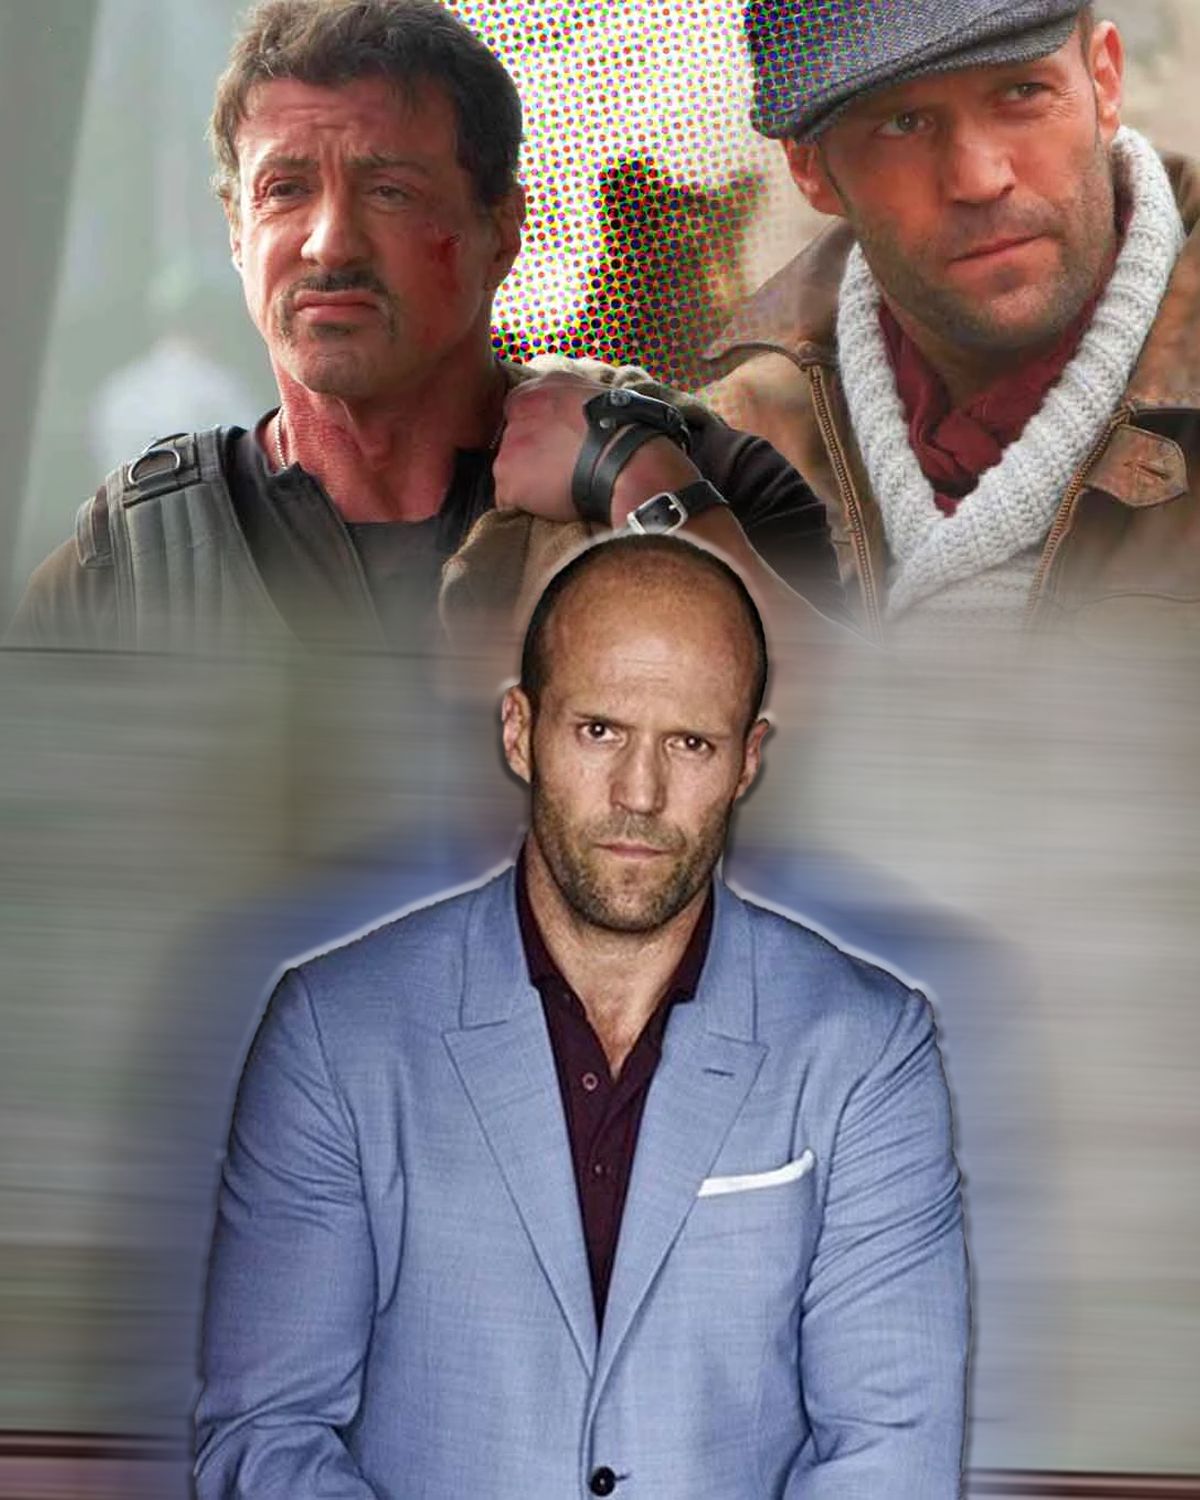 Sylvester Stallone Strongly Believes Jason Statham’s On-Set Accident ...